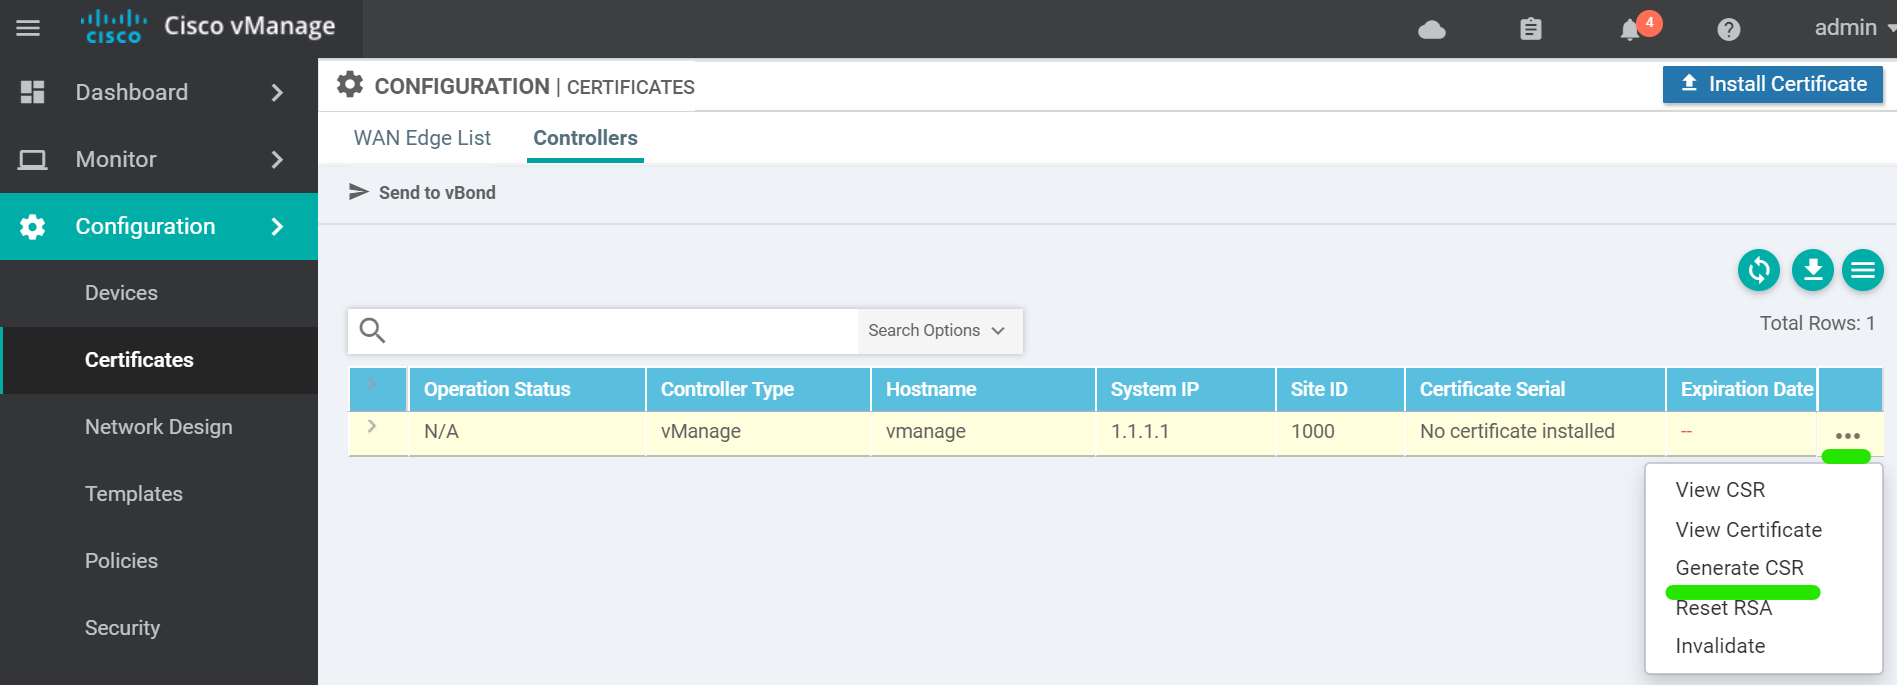 blog/cisco-sdwan-self-hosted-lab-part-2/vmanage-install-7.png